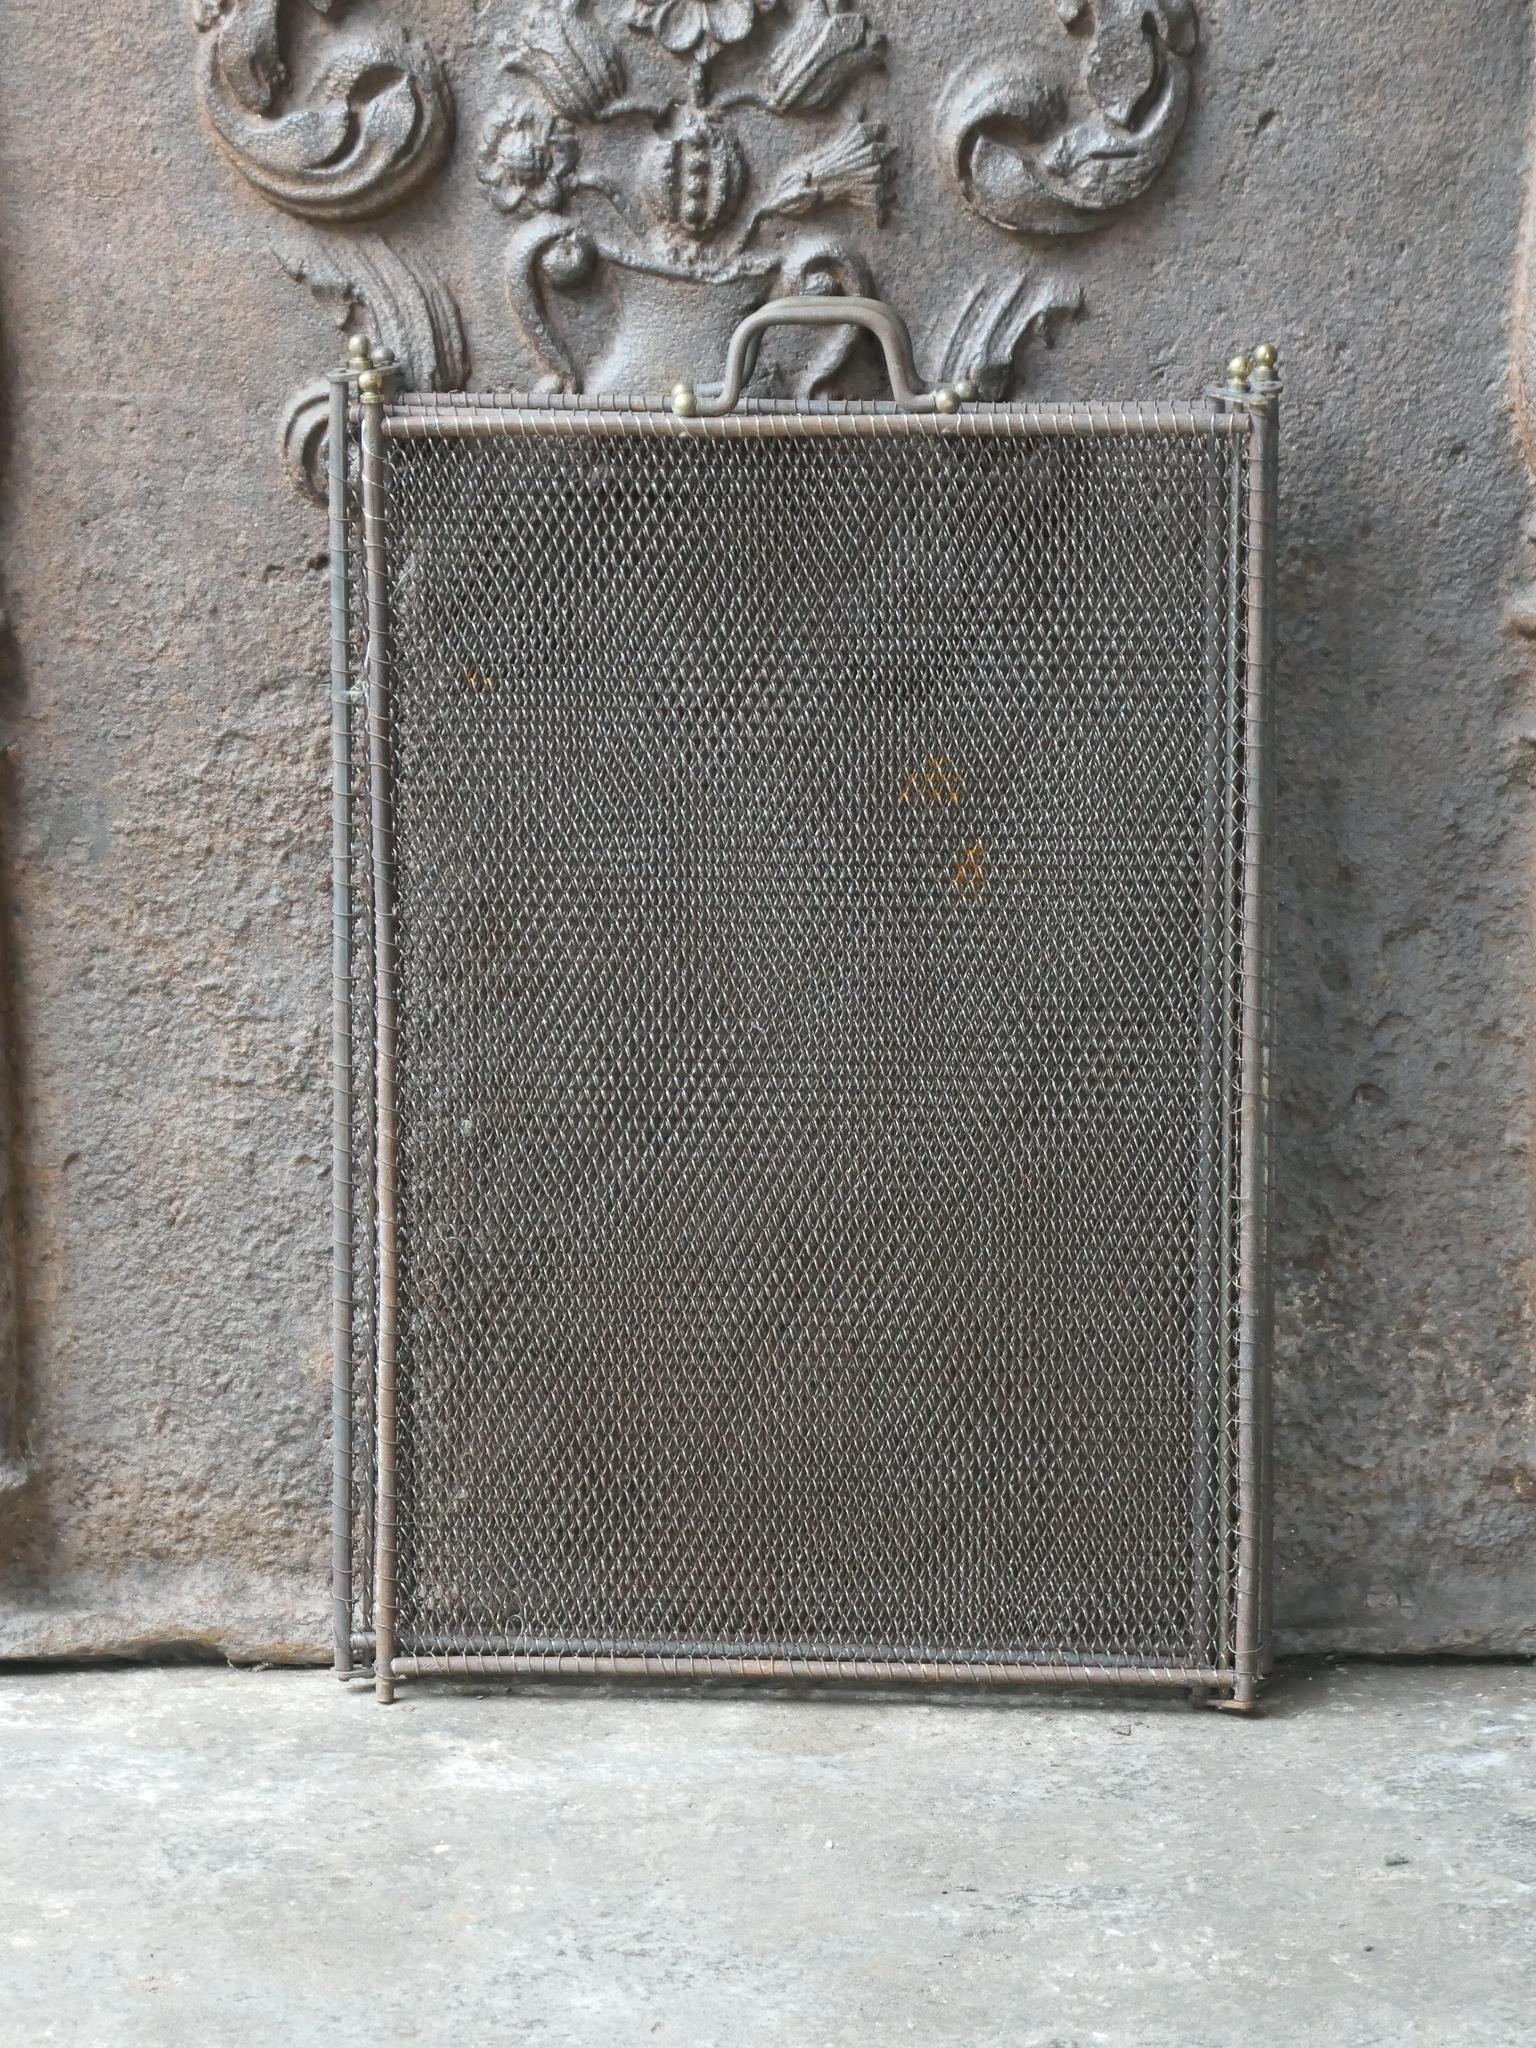 19th century French Napoleon III four-panel fireplace screen. The screen is made of brass, iron and iron mesh. It is in a good condition and is fit for use in front of the fireplace.